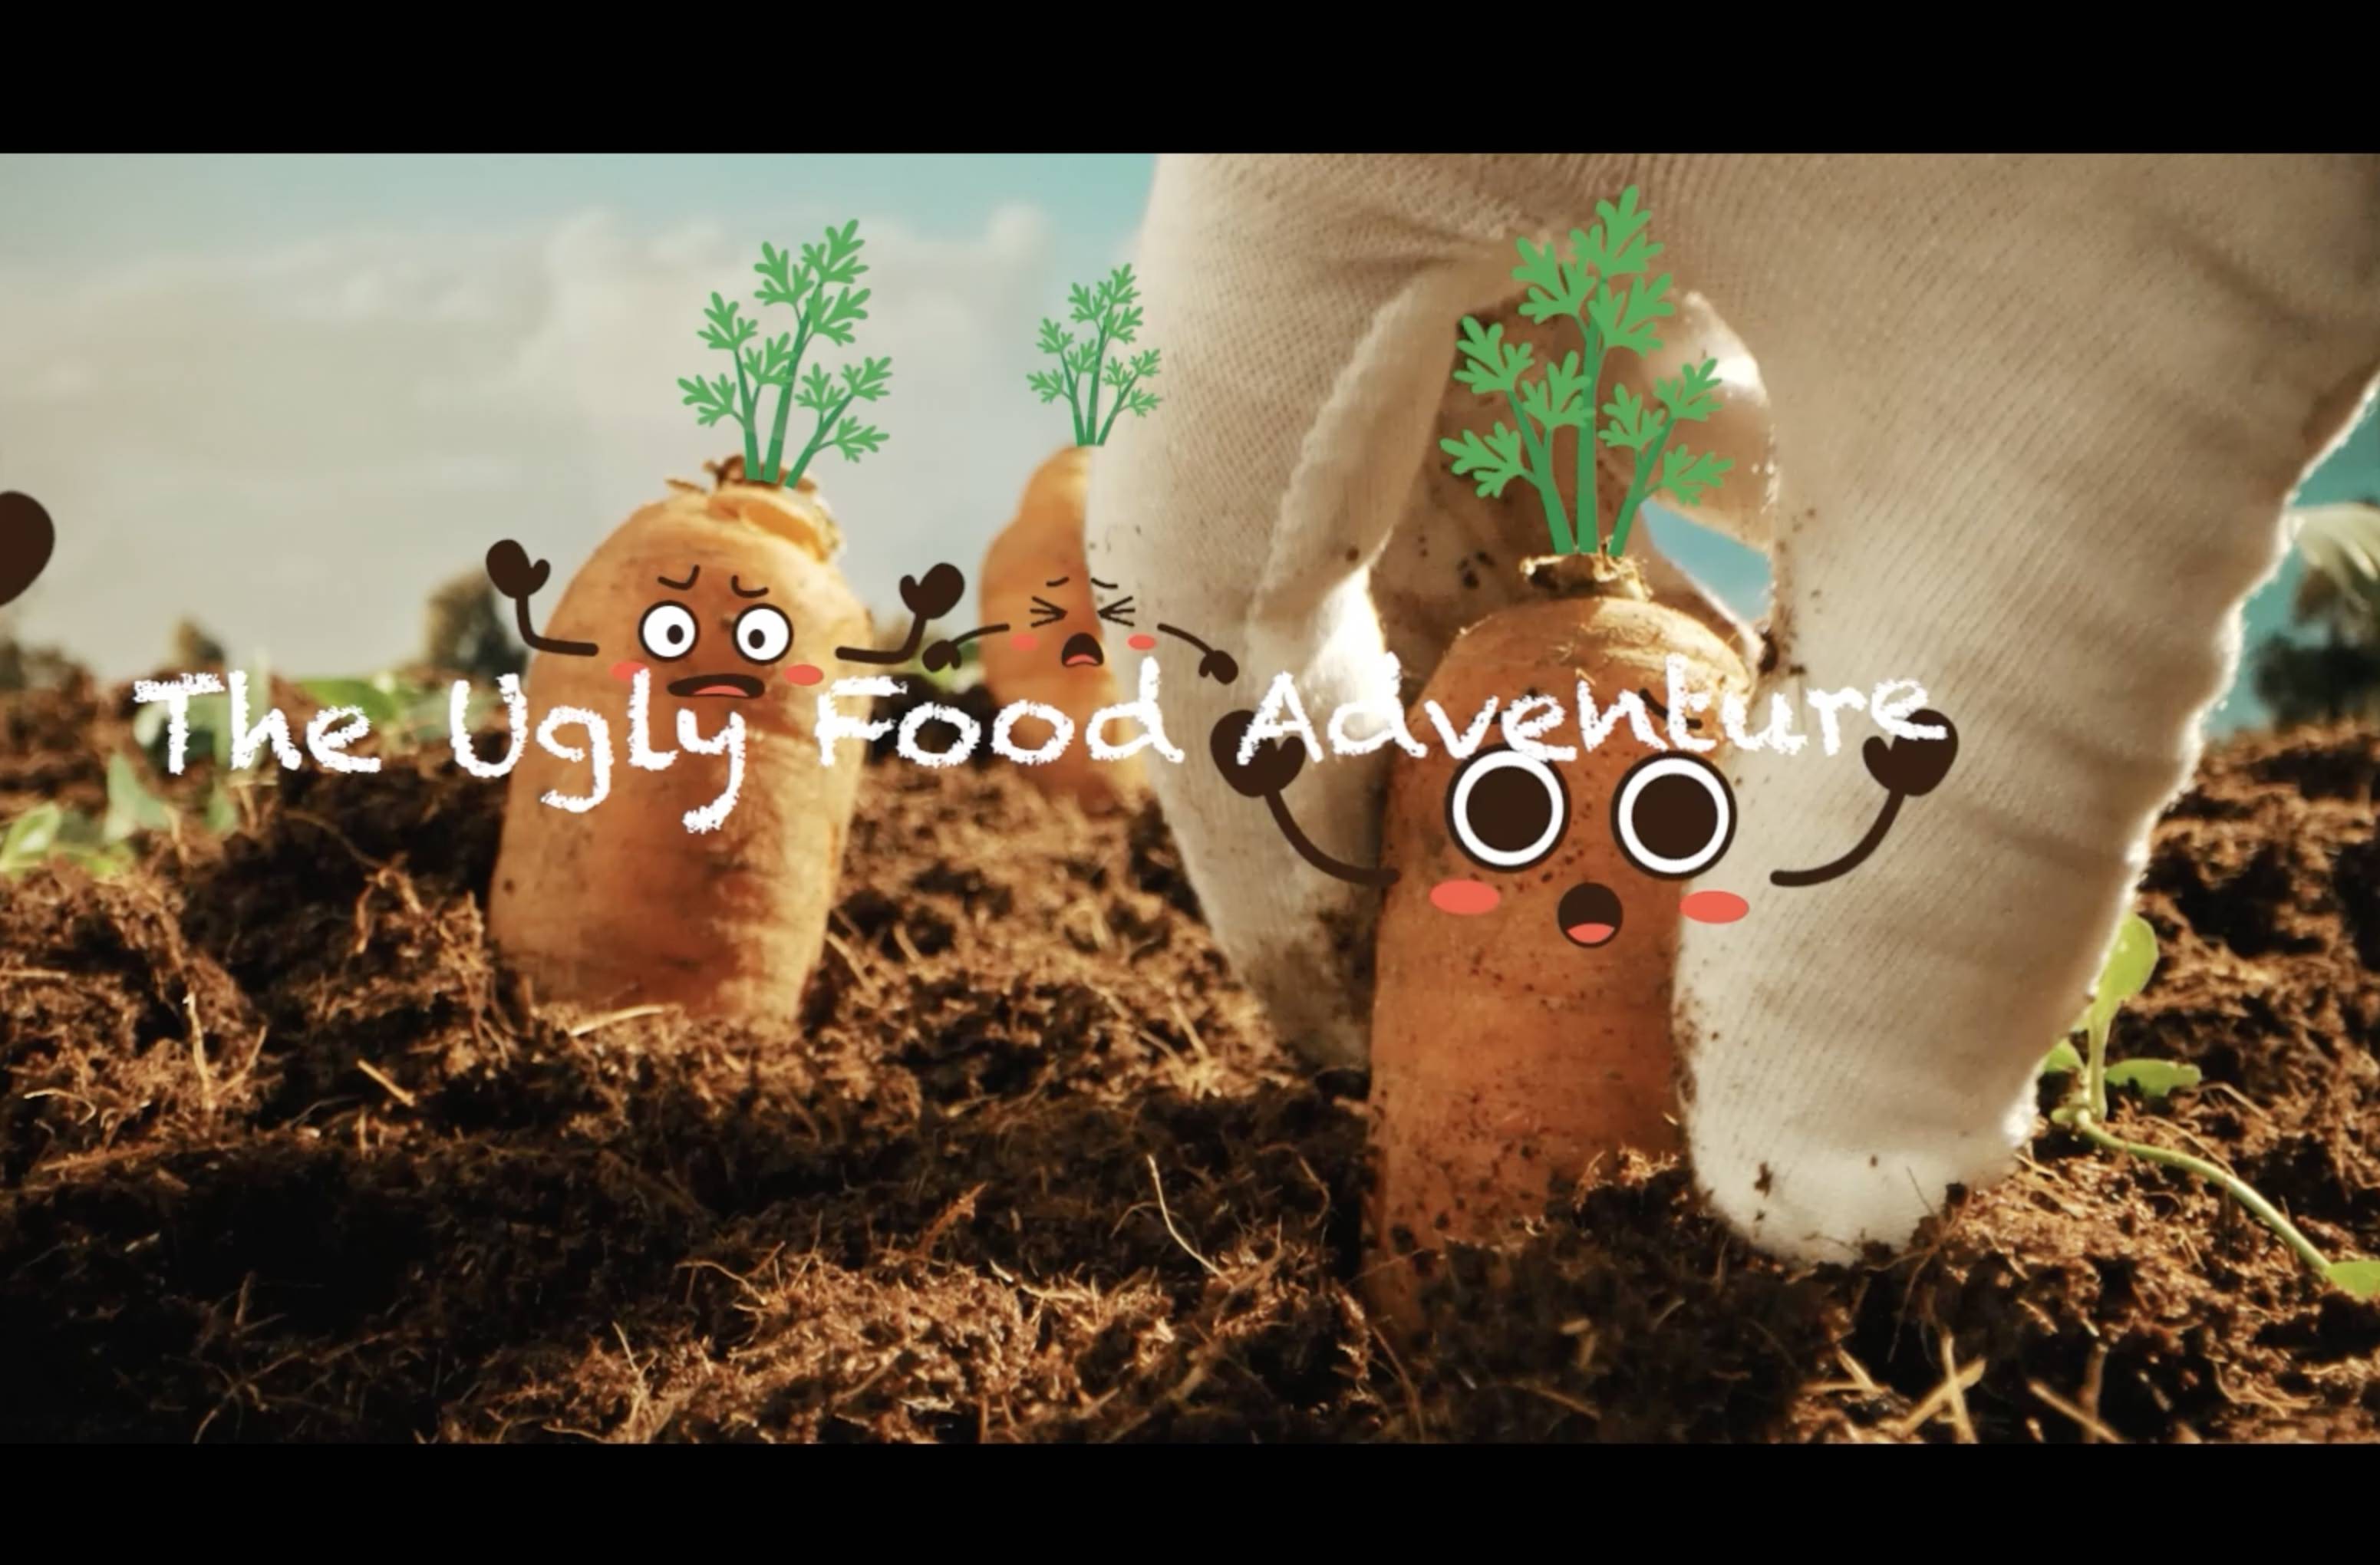 The Ugly Food Adventure